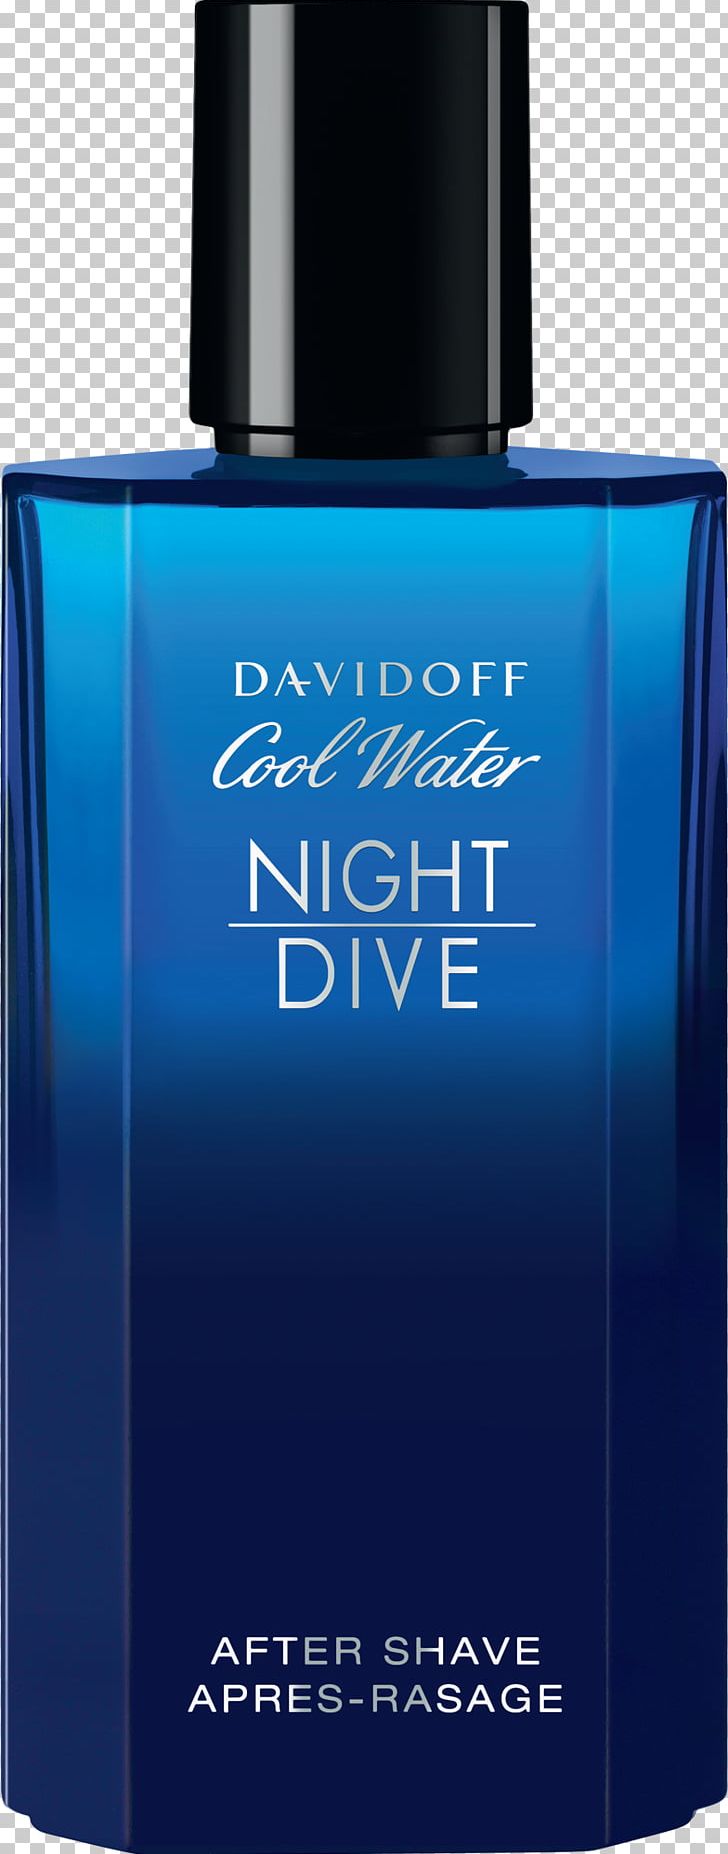 Perfume Lotion Cool Water Aftershave Davidoff PNG, Clipart, Aftershave, Cool, Cool Water, Cosmetics, Davidoff Free PNG Download